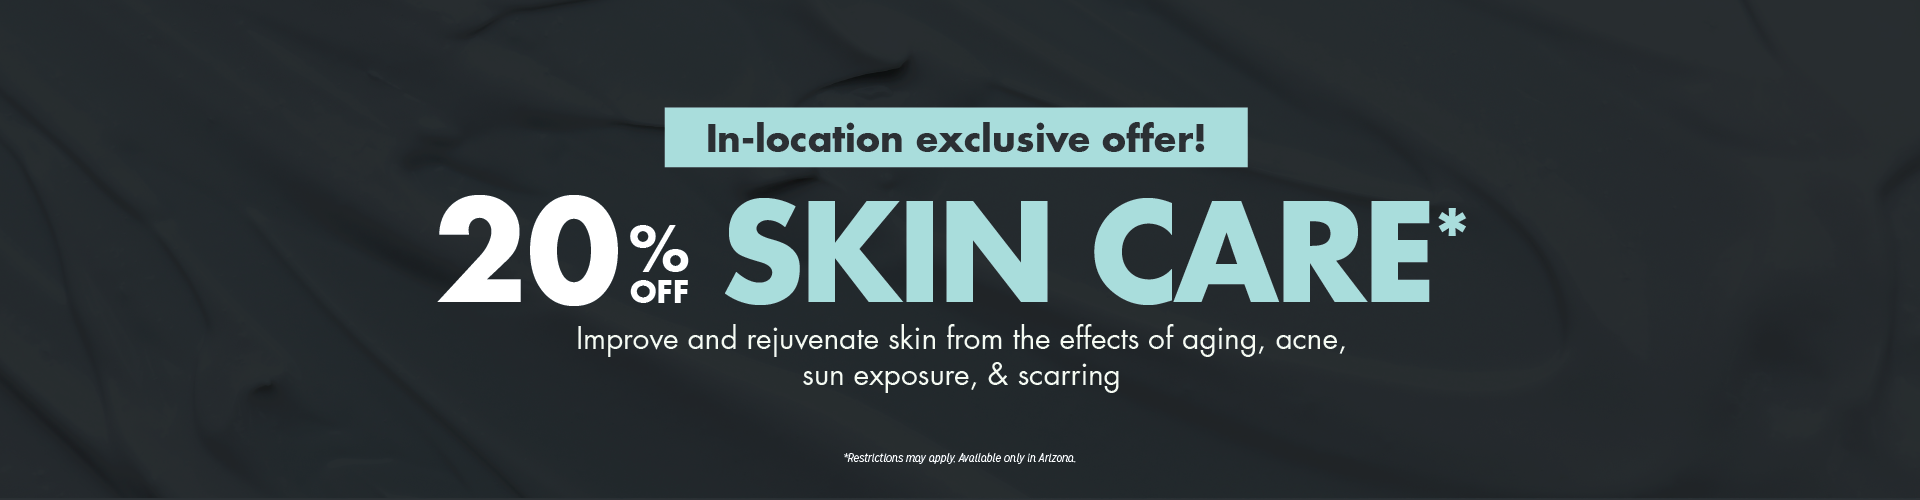 20% off skin care in location only